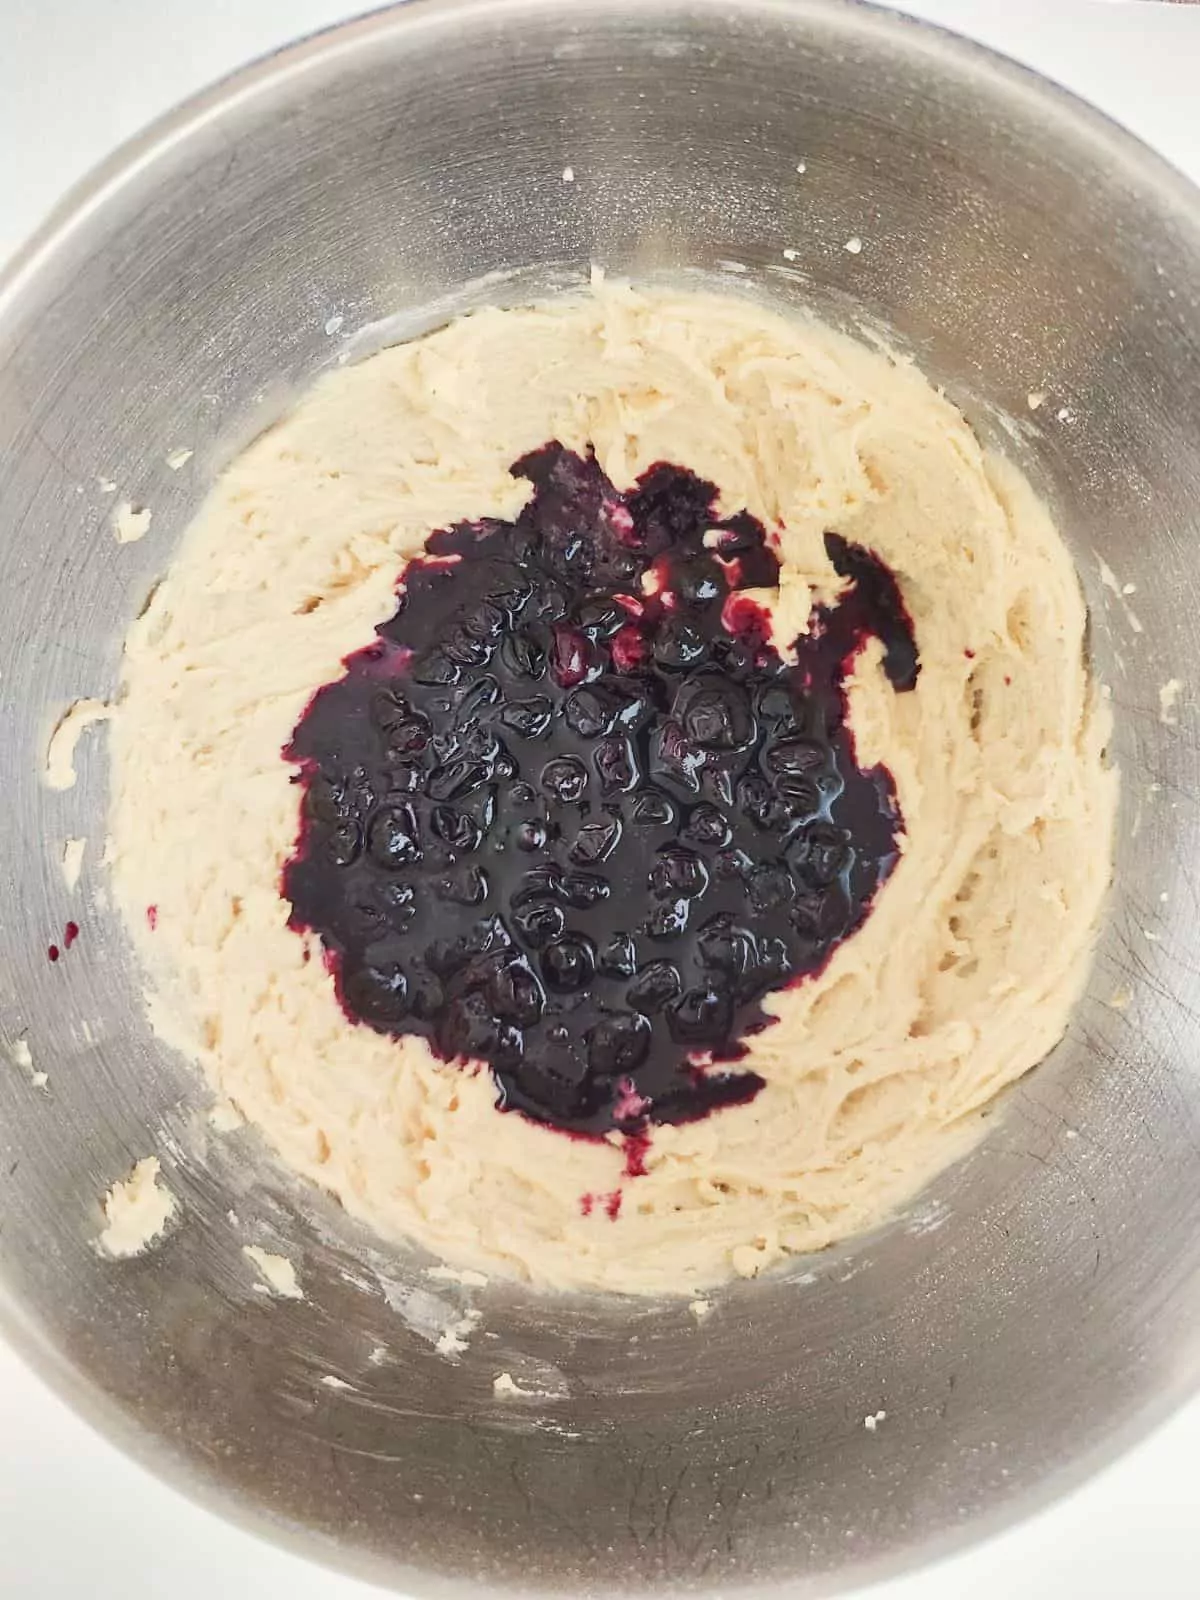 Blueberry puree in cupcake batter.